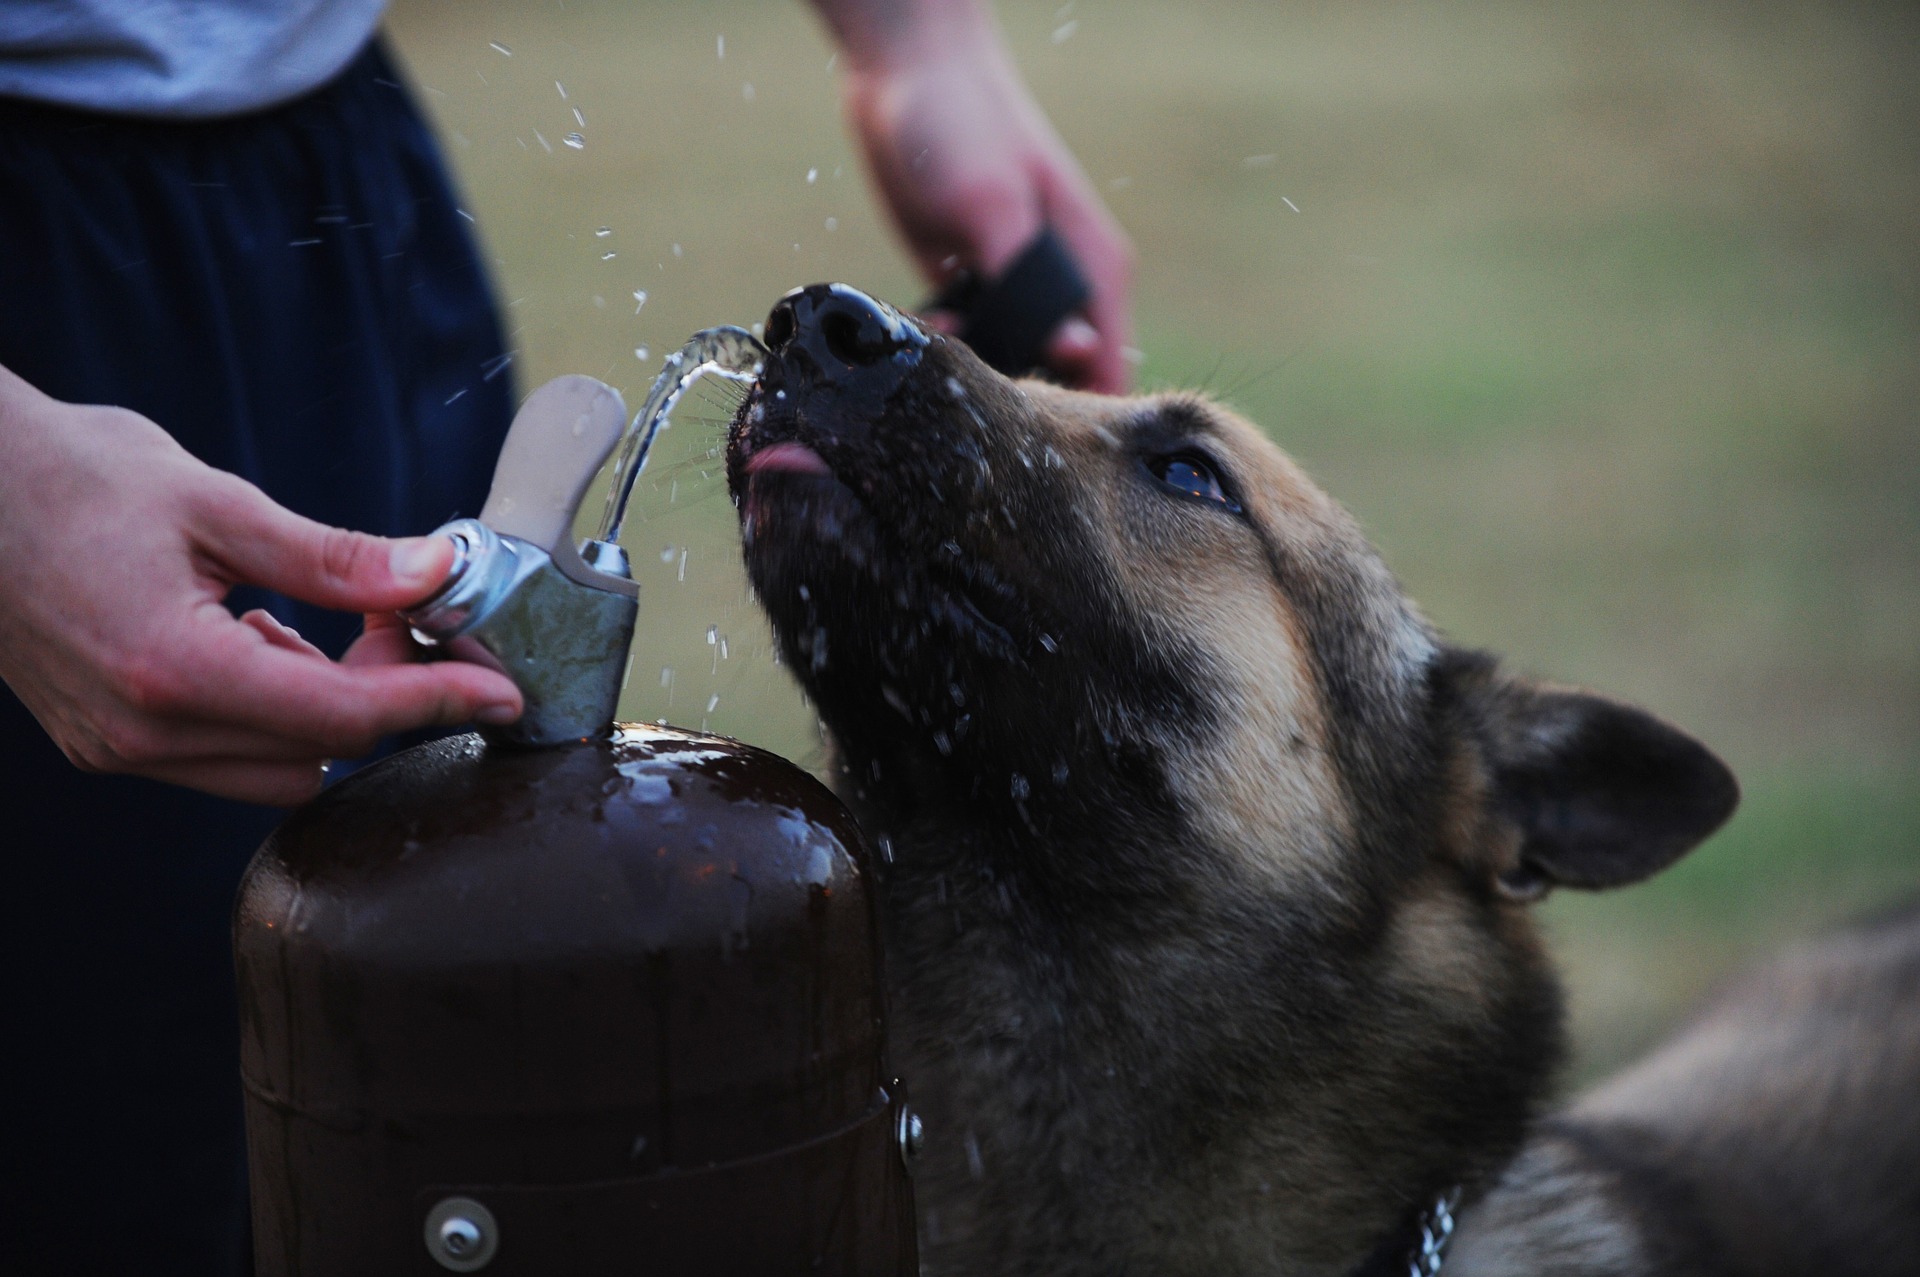 A person is pushing the button of the dog water fountain while the dog is drinking water